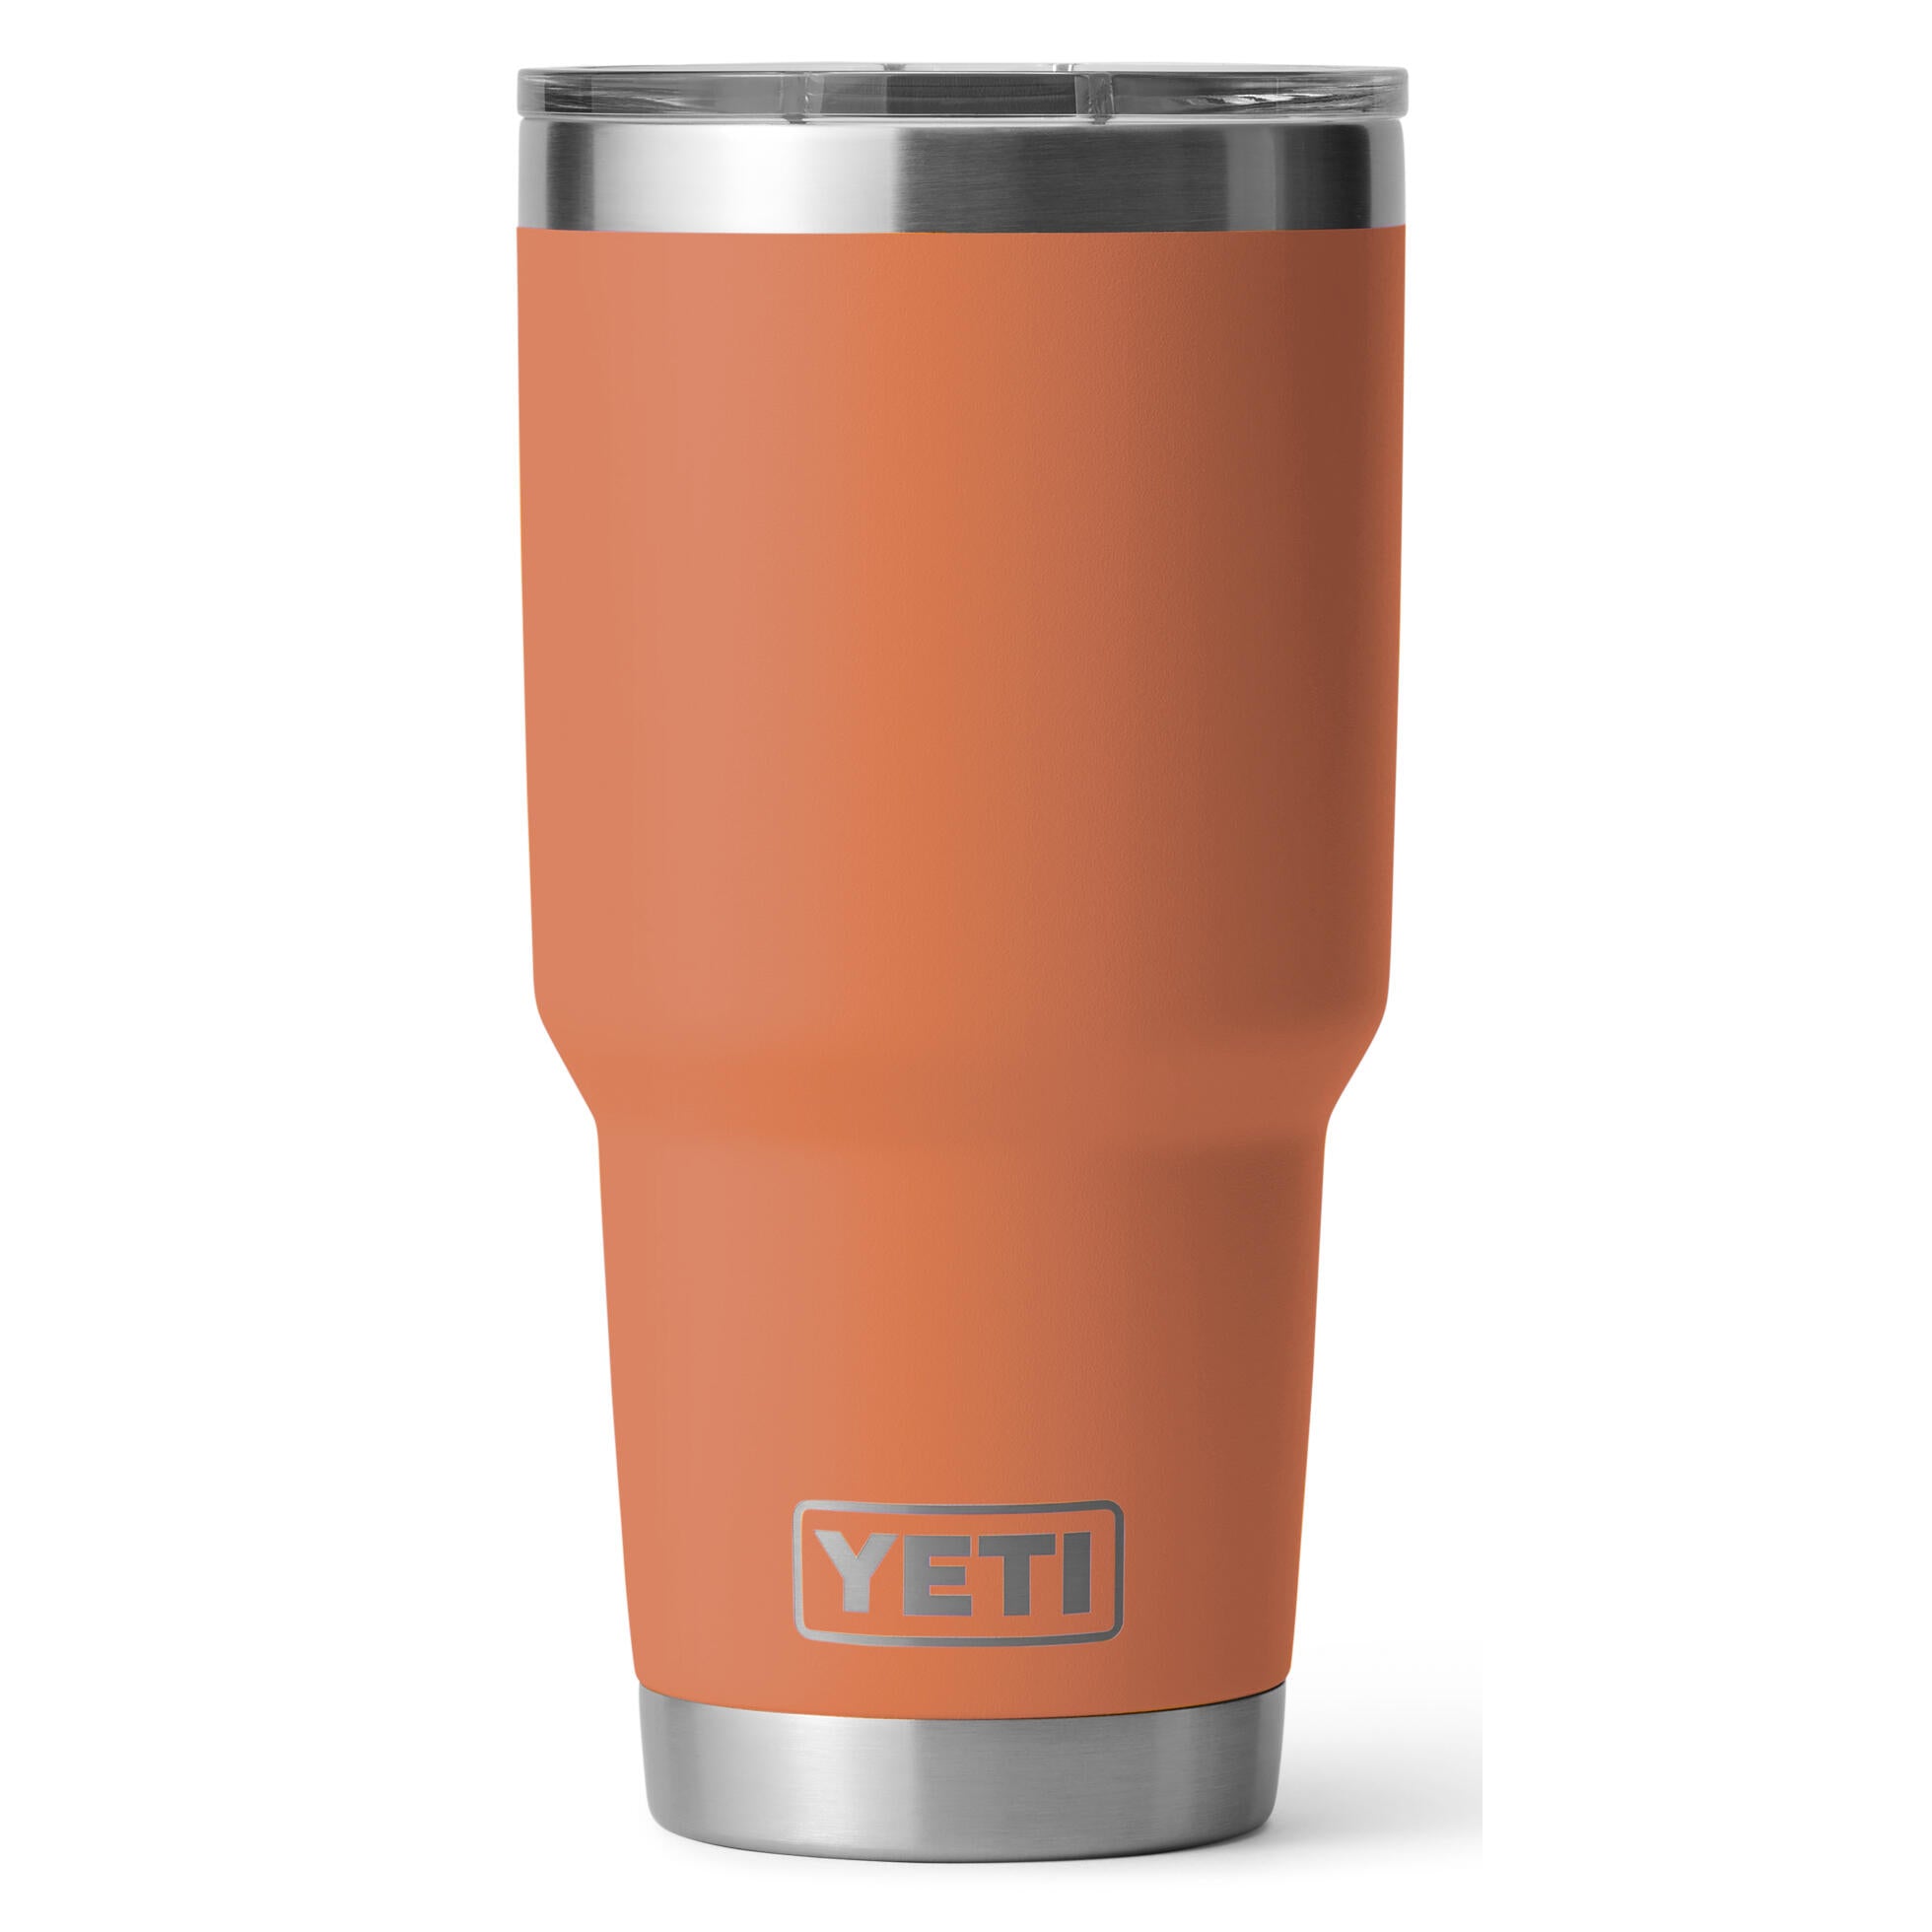 ml　oz.)　Lid　Yeti　887　Rambler　for　Source　(30　Tumbler　MagSlider　with　Sports